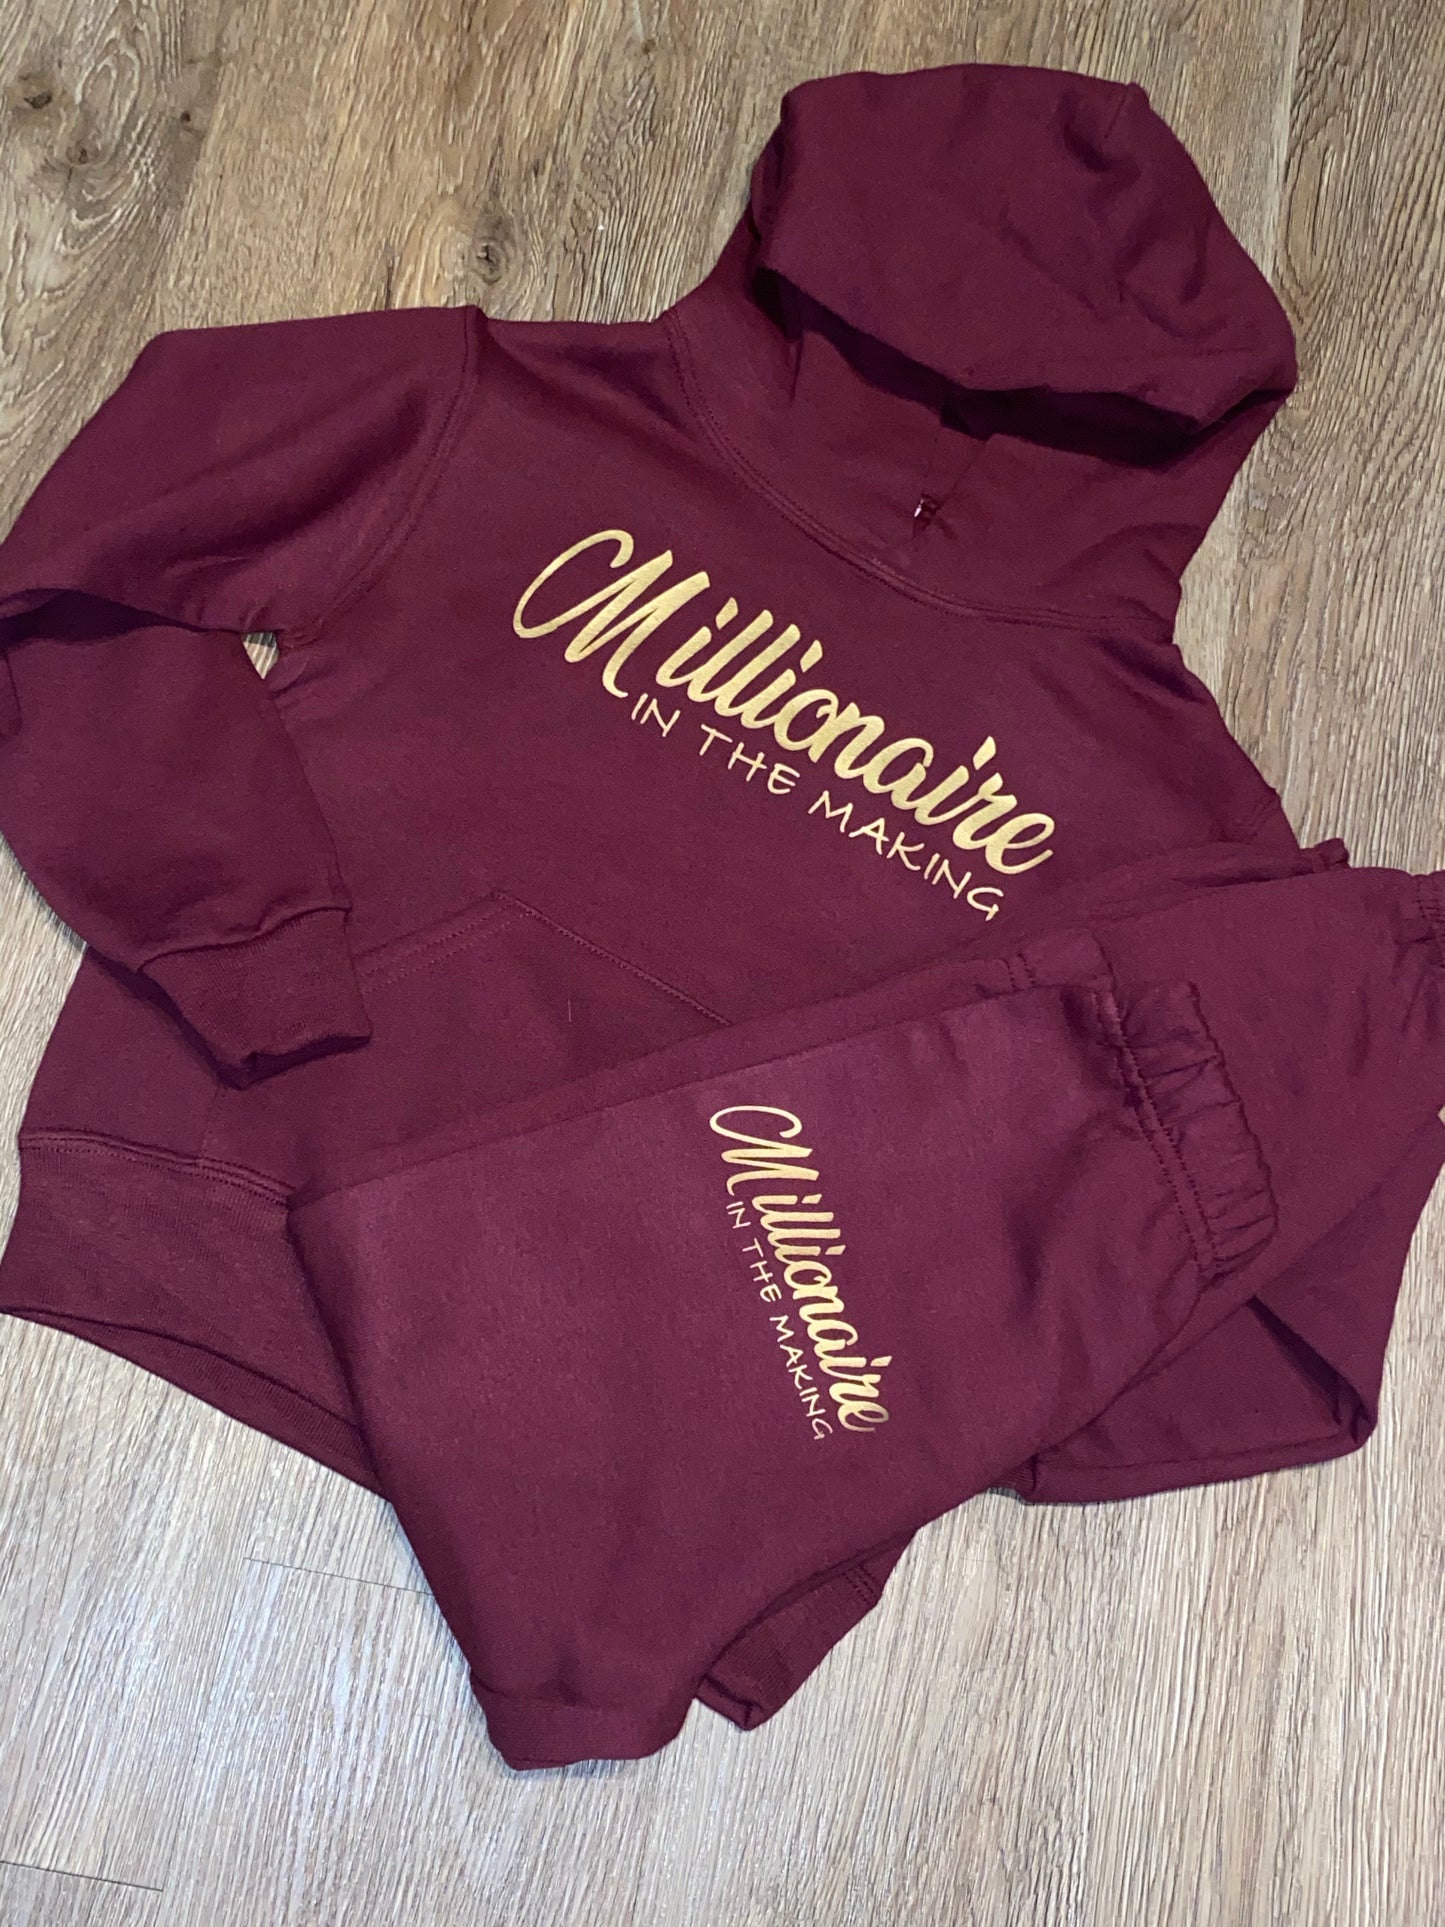 Millionaire in the making hoodie youth